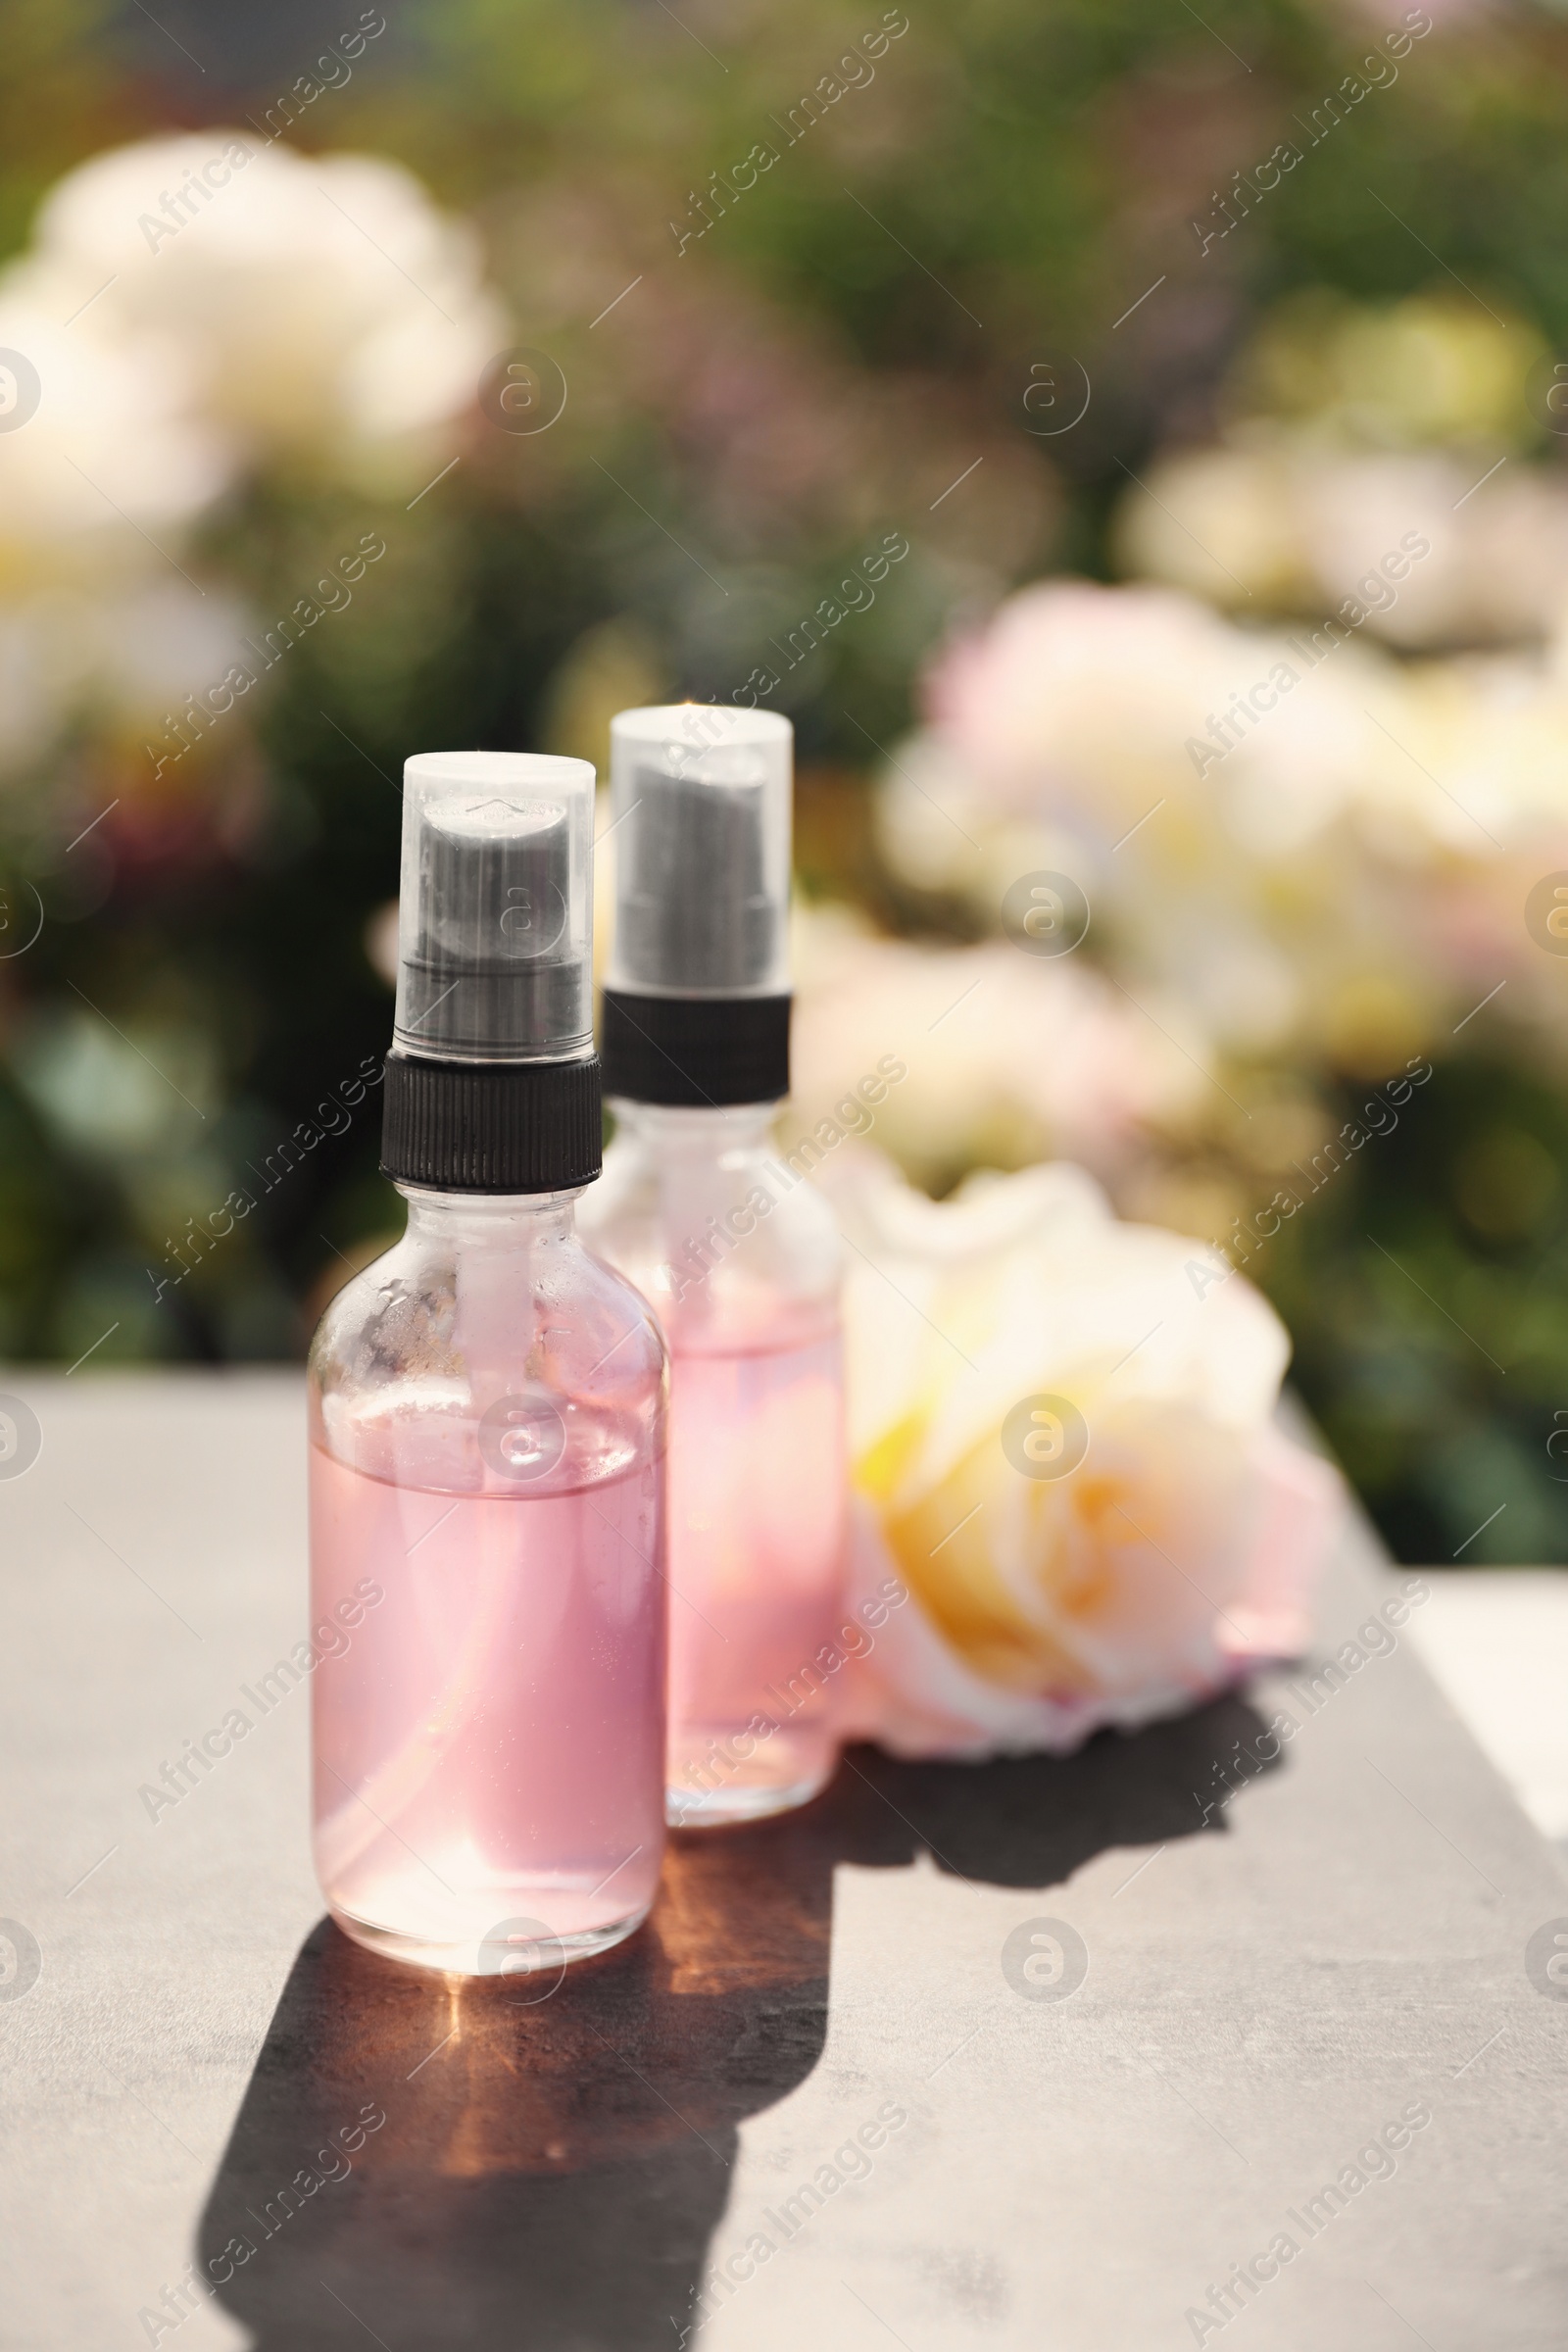 Photo of Bottles of facial toner with essential oil and fresh rose on table against blurred background